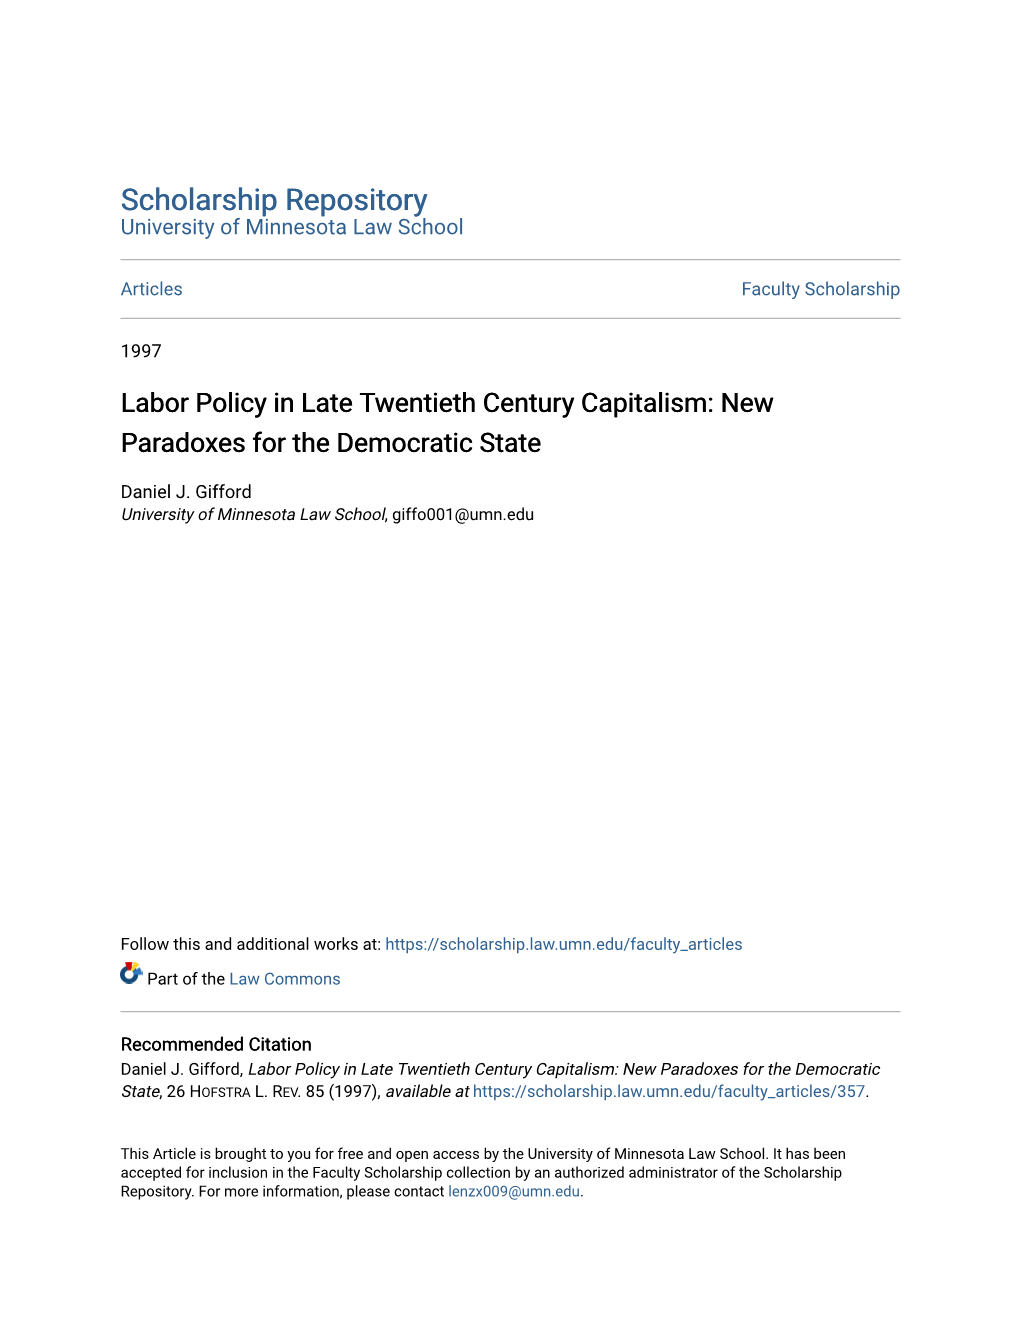 Labor Policy in Late Twentieth Century Capitalism: New Paradoxes for the Democratic State